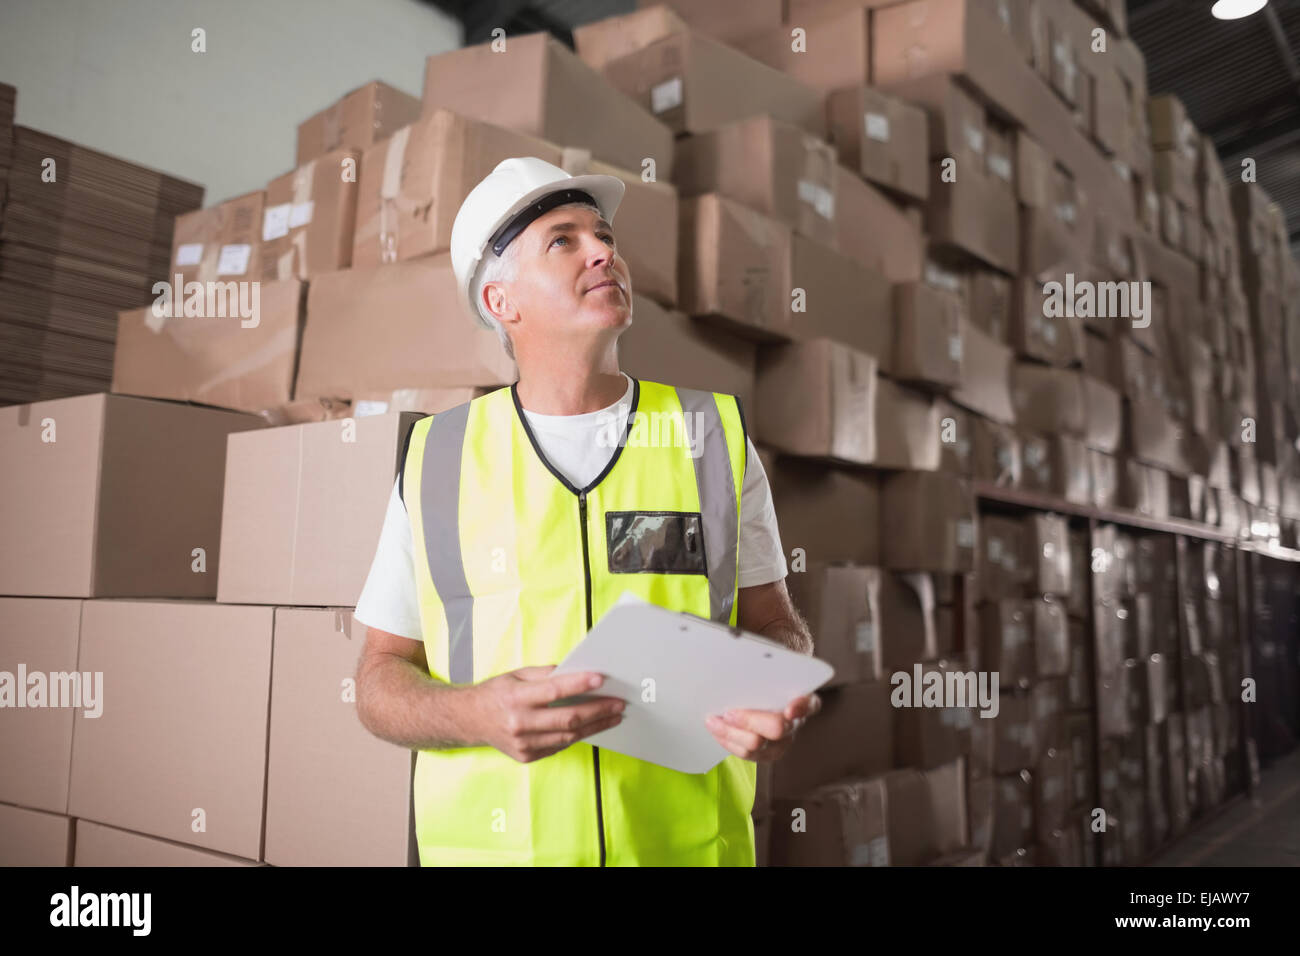 Manual worker in warehouse Stock Photo